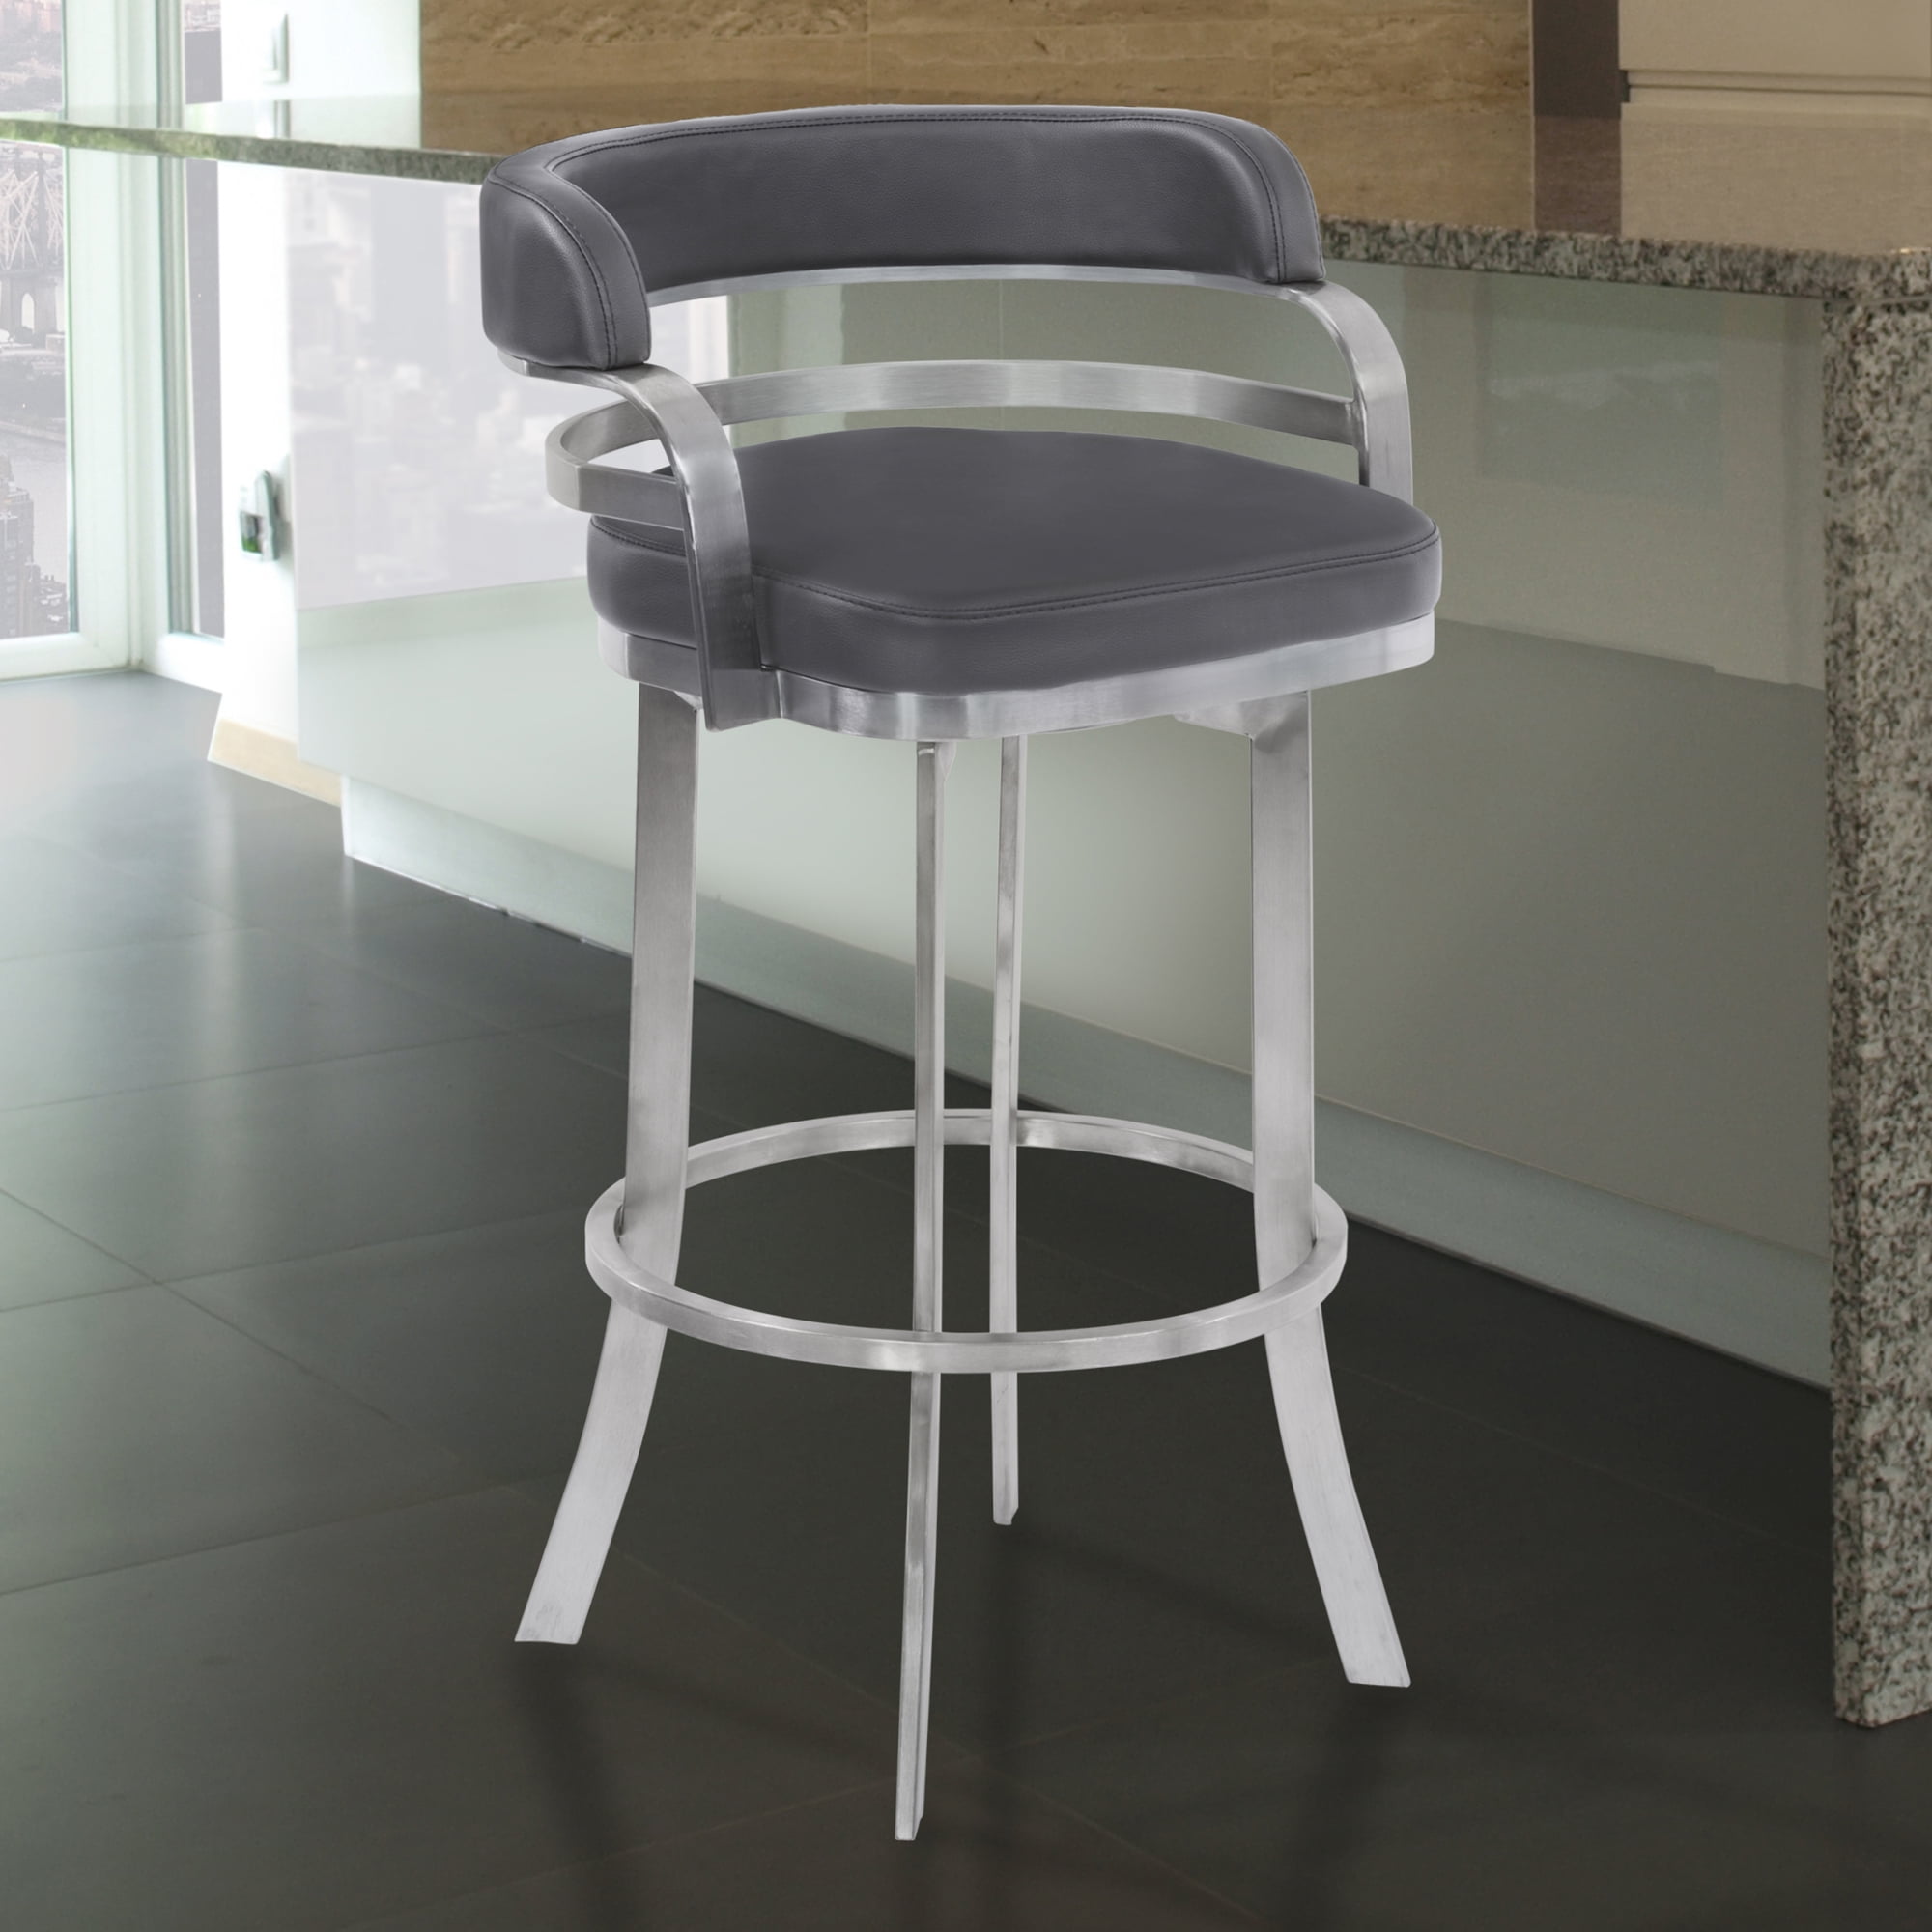 Picture of Armen Living LCPRBAGRBS26 31.1 x 22.05 x 21.26 in. 26 in. Prinz Counter Height Metal Swivel Barstool, Gray Faux Leather with Brushed Stainless Steel